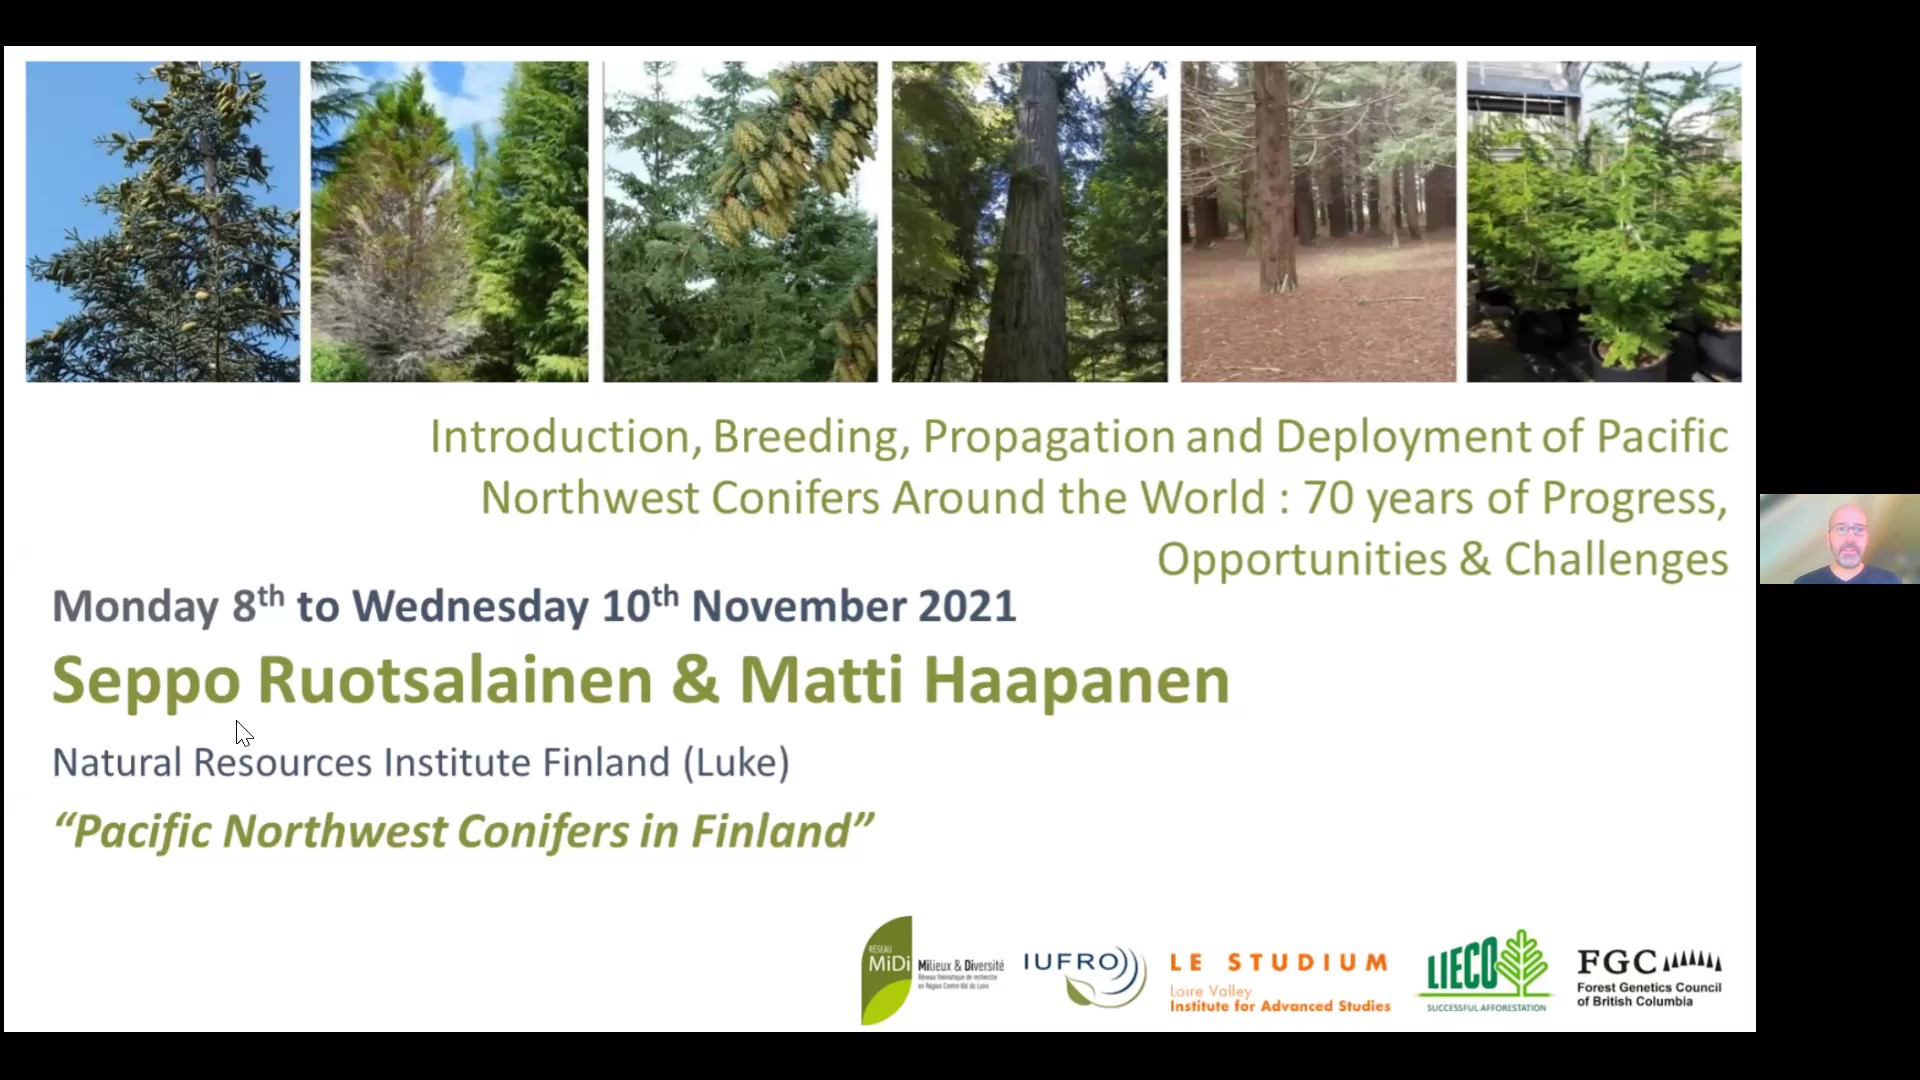 Experiences with PNW Conifers in Finland- Seppo Ruotsalainen